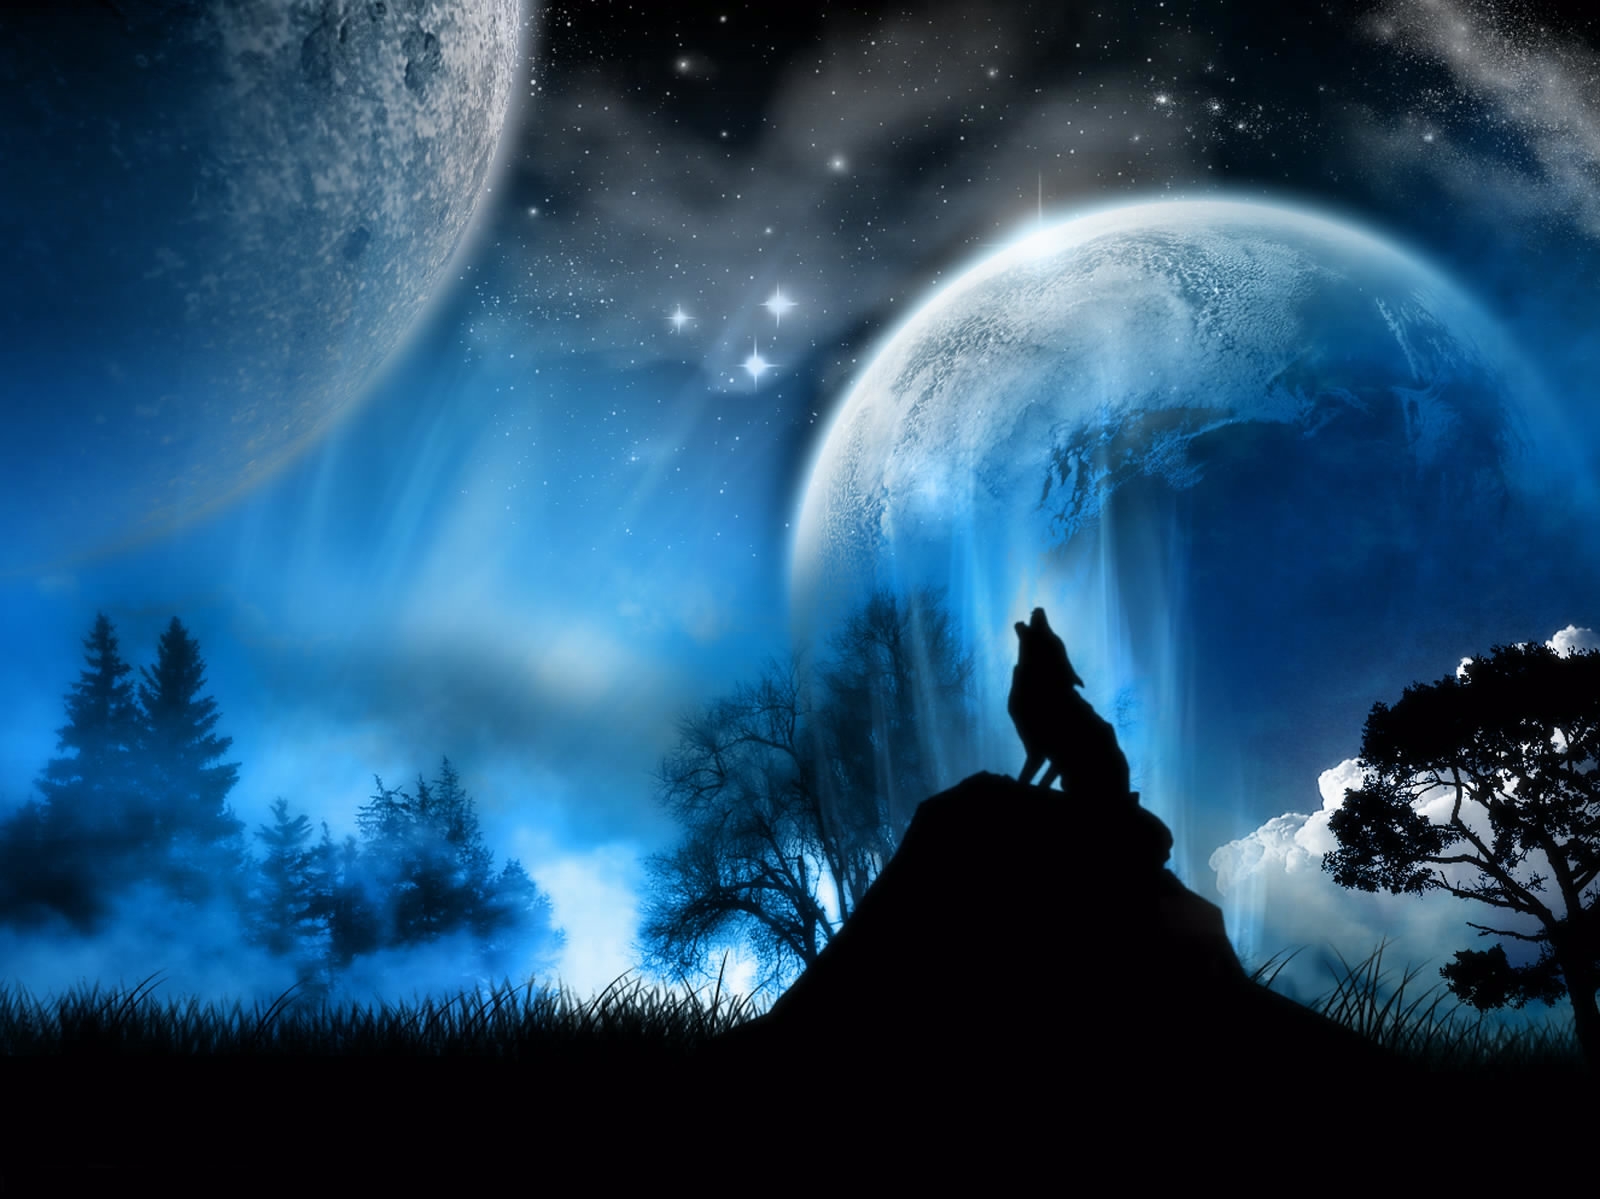 Moon light and stars night background with trees nature art images